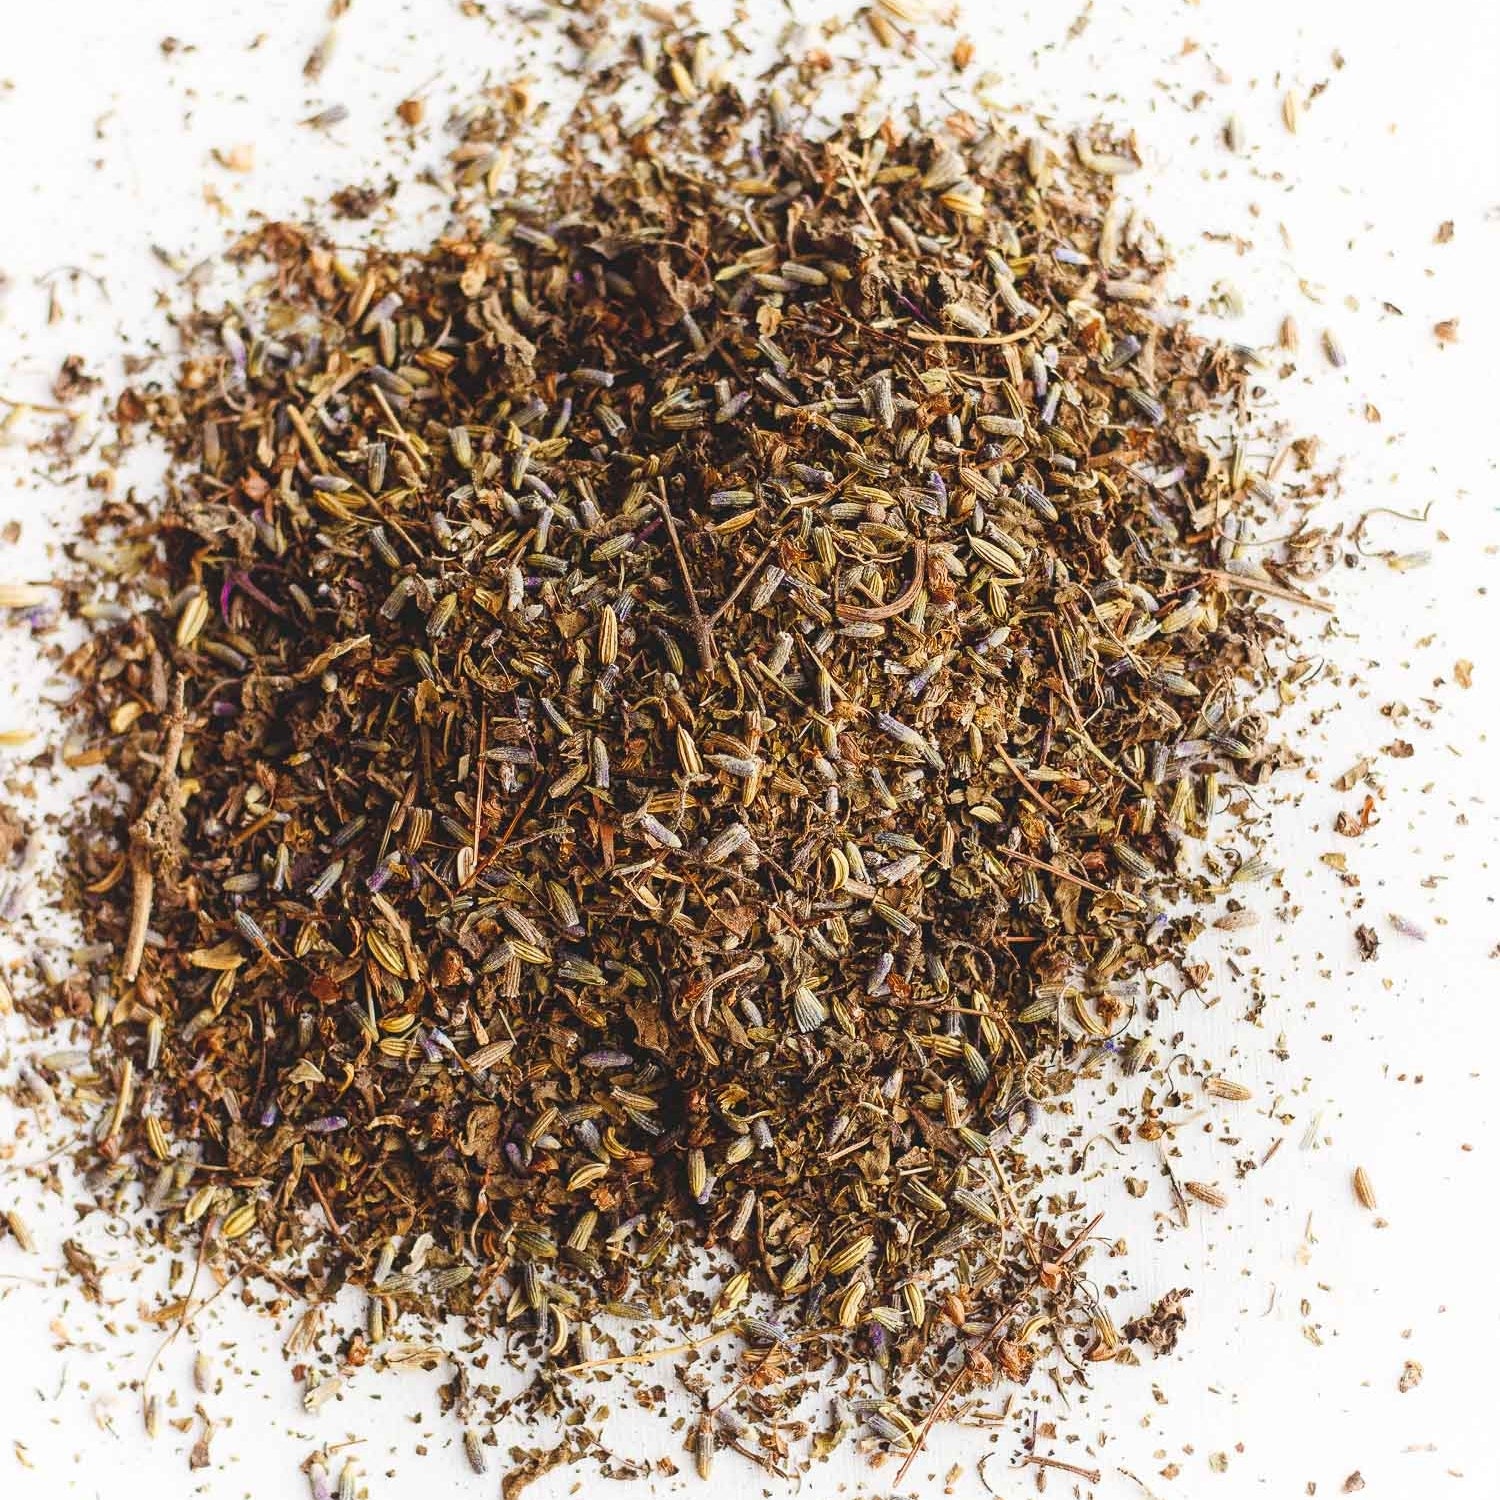 A pile of loose leaf Calm Yo' Tummy Tea, an organic blend featuring tulsi, lavender, fennel seed, and brahmi. Designed to stimulate digestion, soothe upset stomachs, relieve stress, and support lactation. Offers a balanced sweet and savory flavor profile.